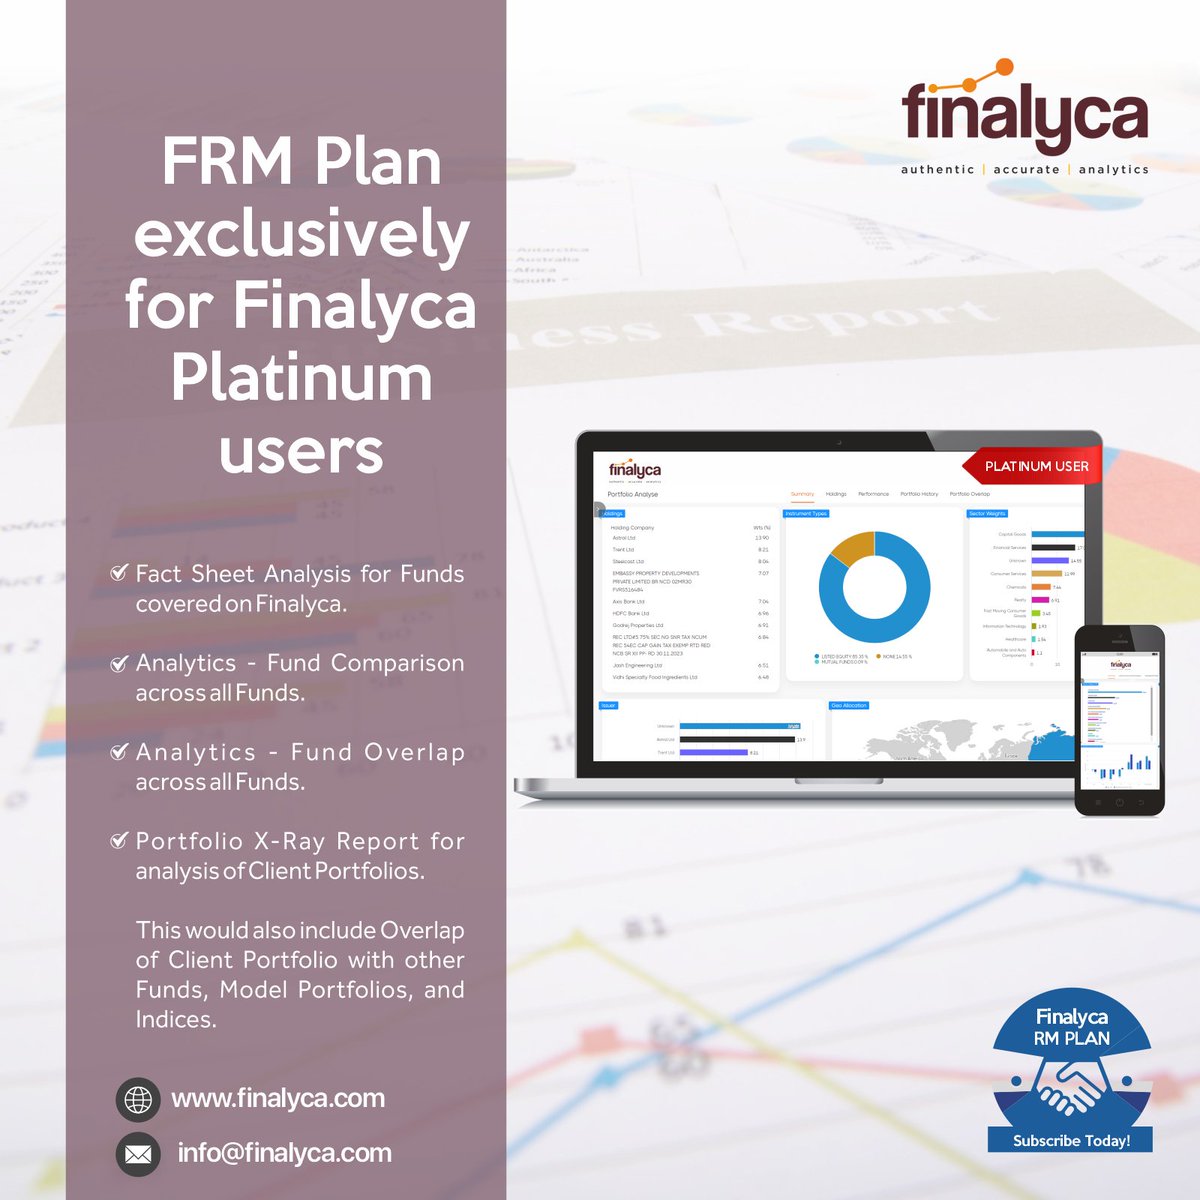 FRM would be exclusively available for FinalycaPlatinum users. 

Get a free demo at finalyca.com

#stockmarket #PMS #portfoliomanagement #mutualfunds